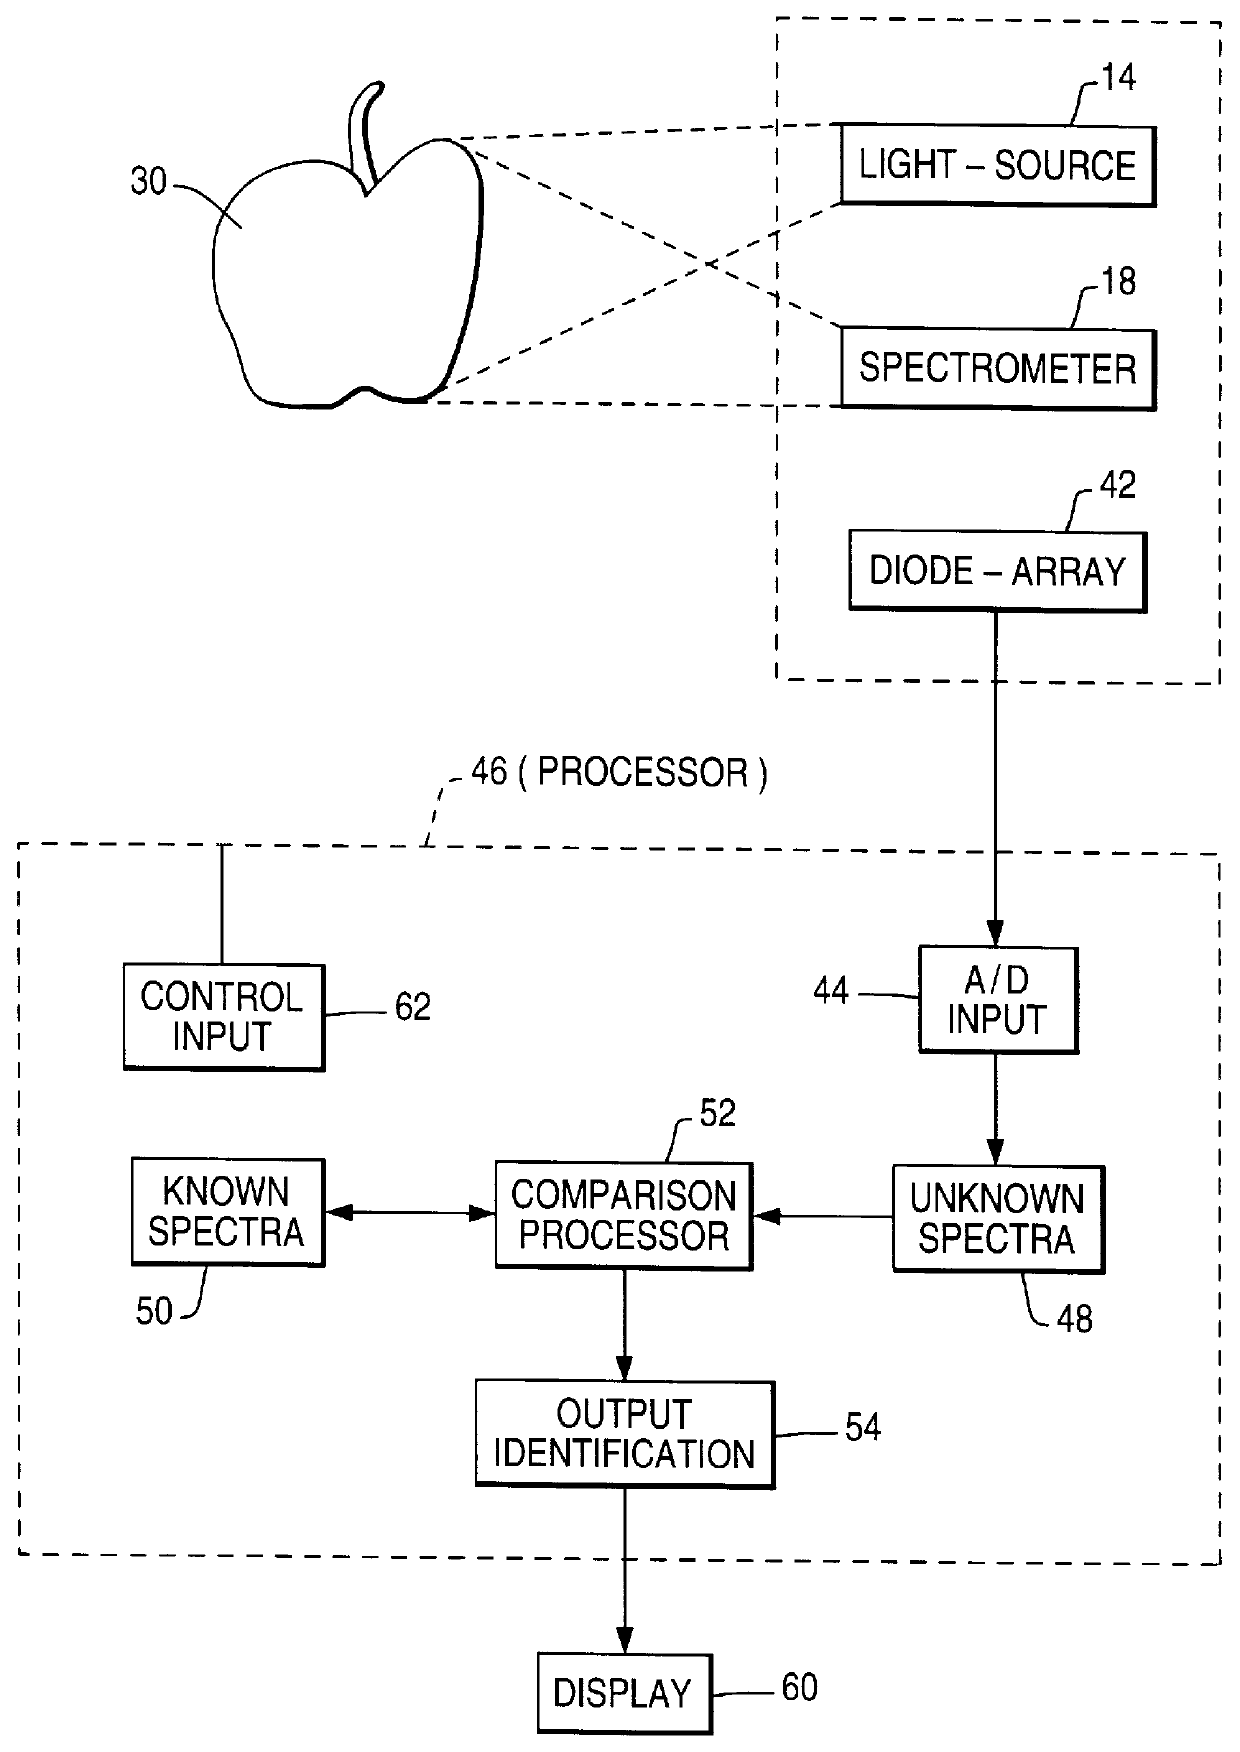 System and method for spectroscopic product recognition and identification